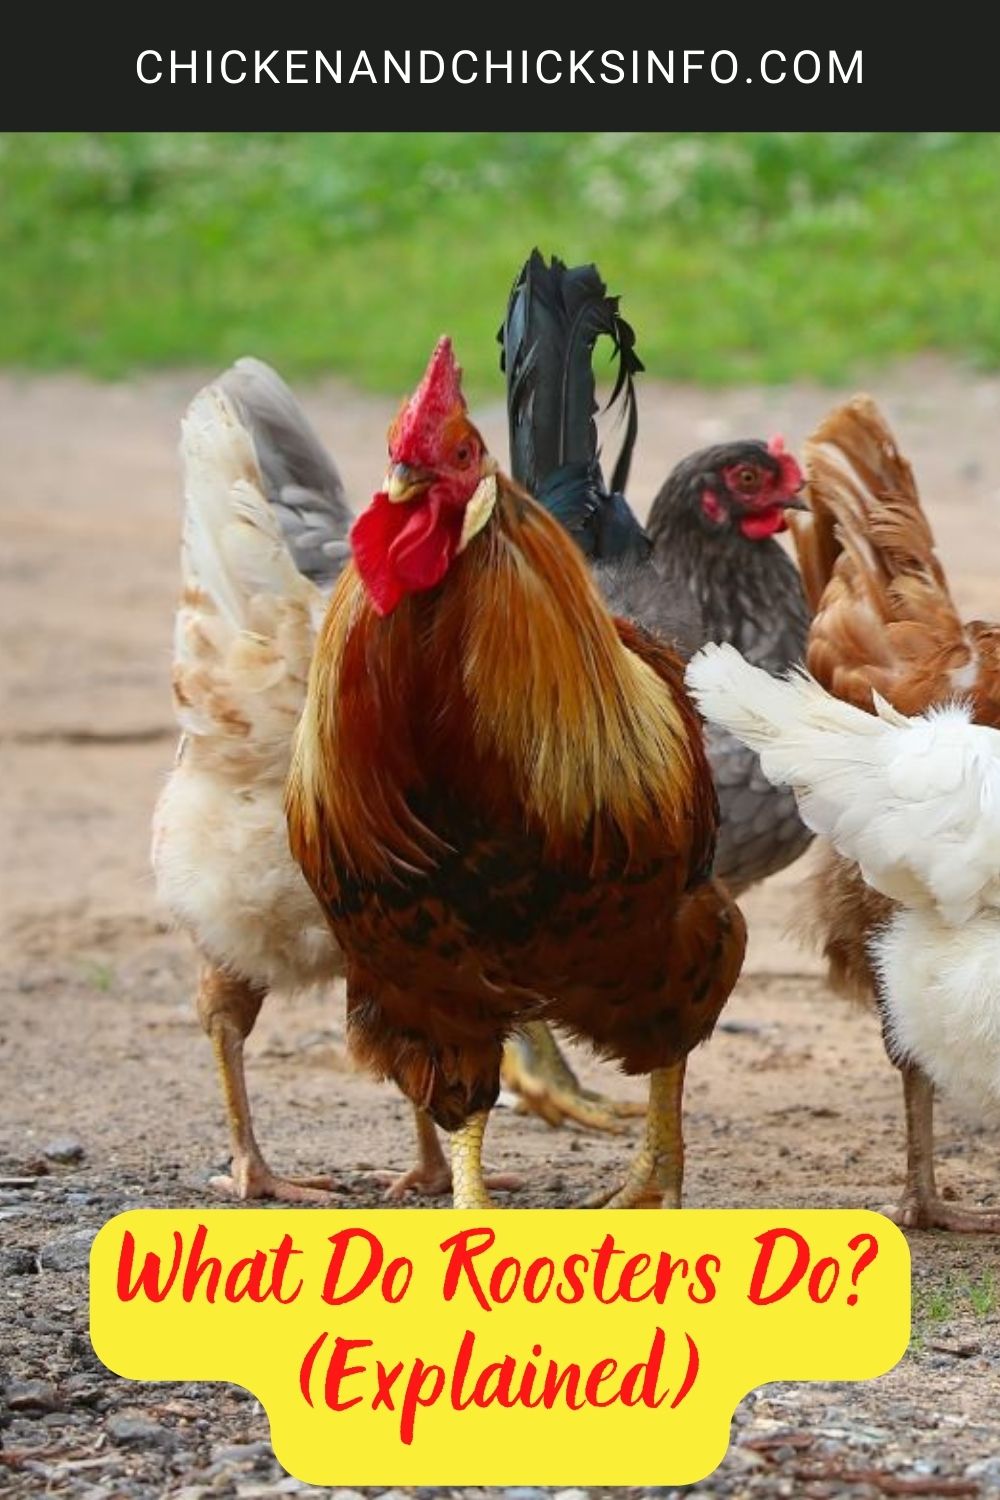 What Do Roosters Do? (Explained) poster.
